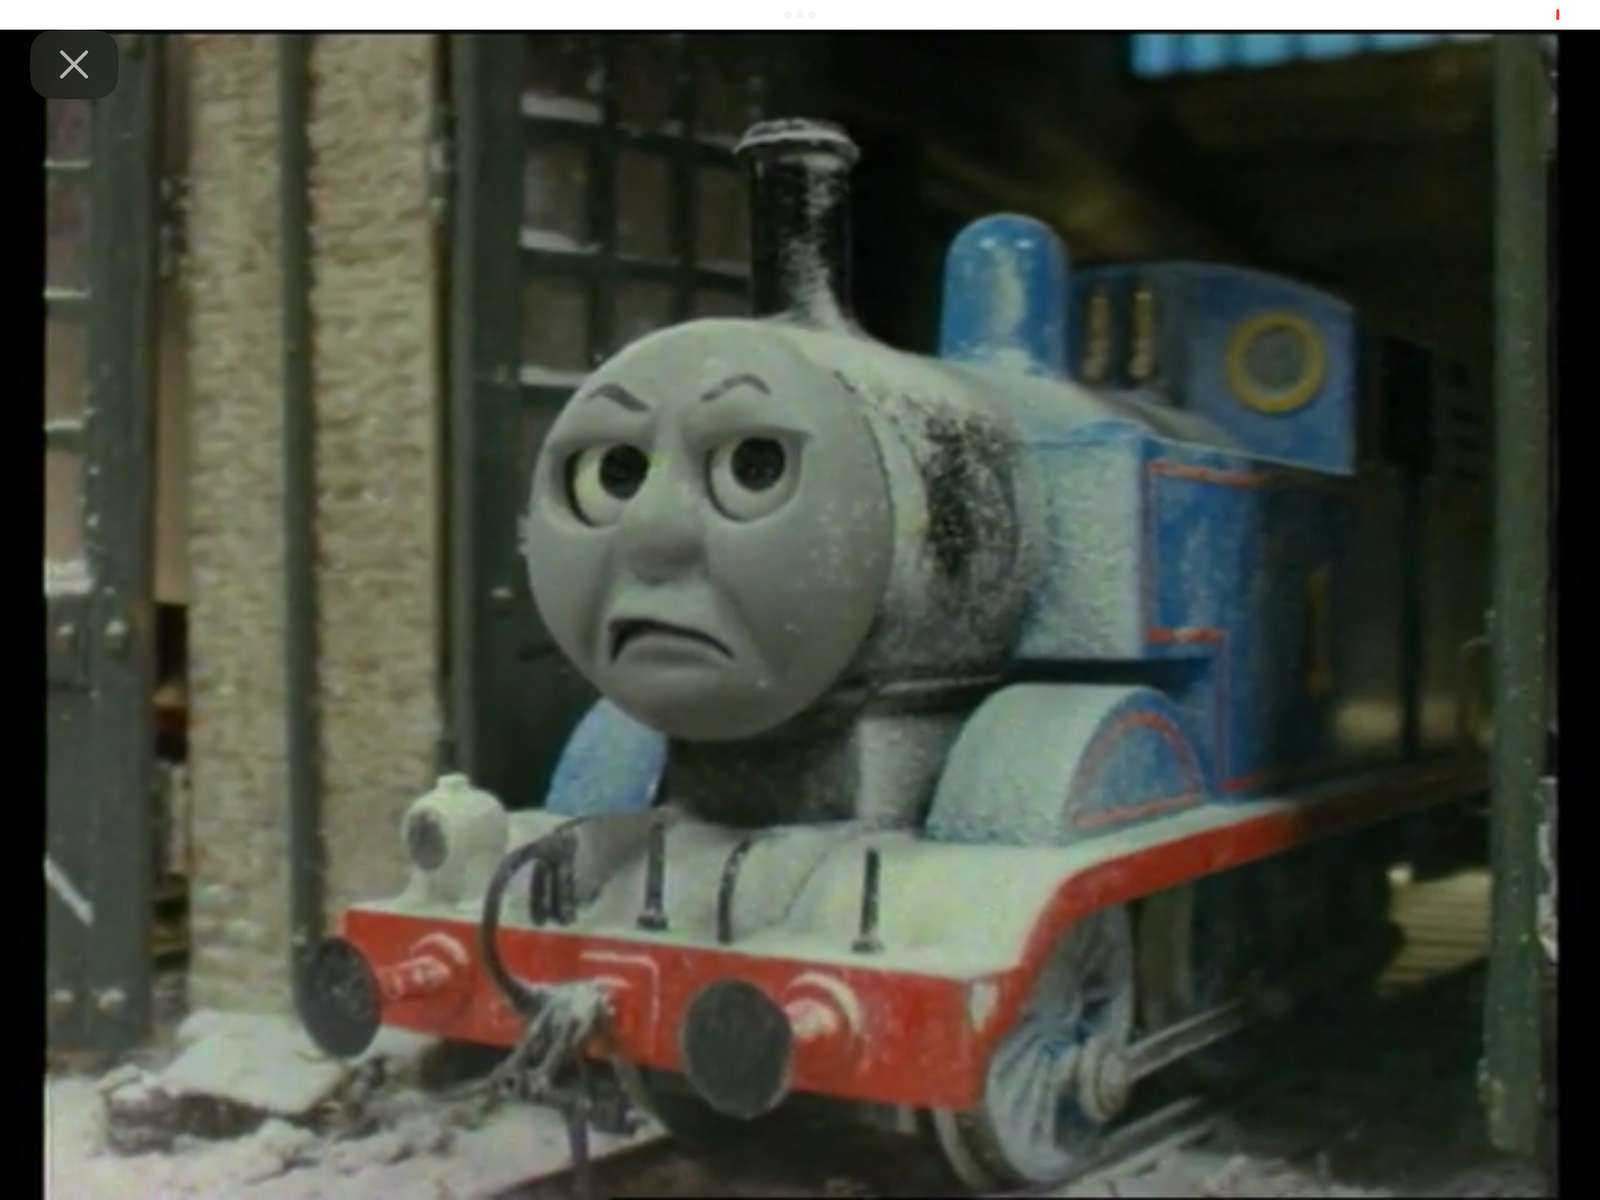 Thomas and friends s03e01 a scarf for percy puzzle online from photo